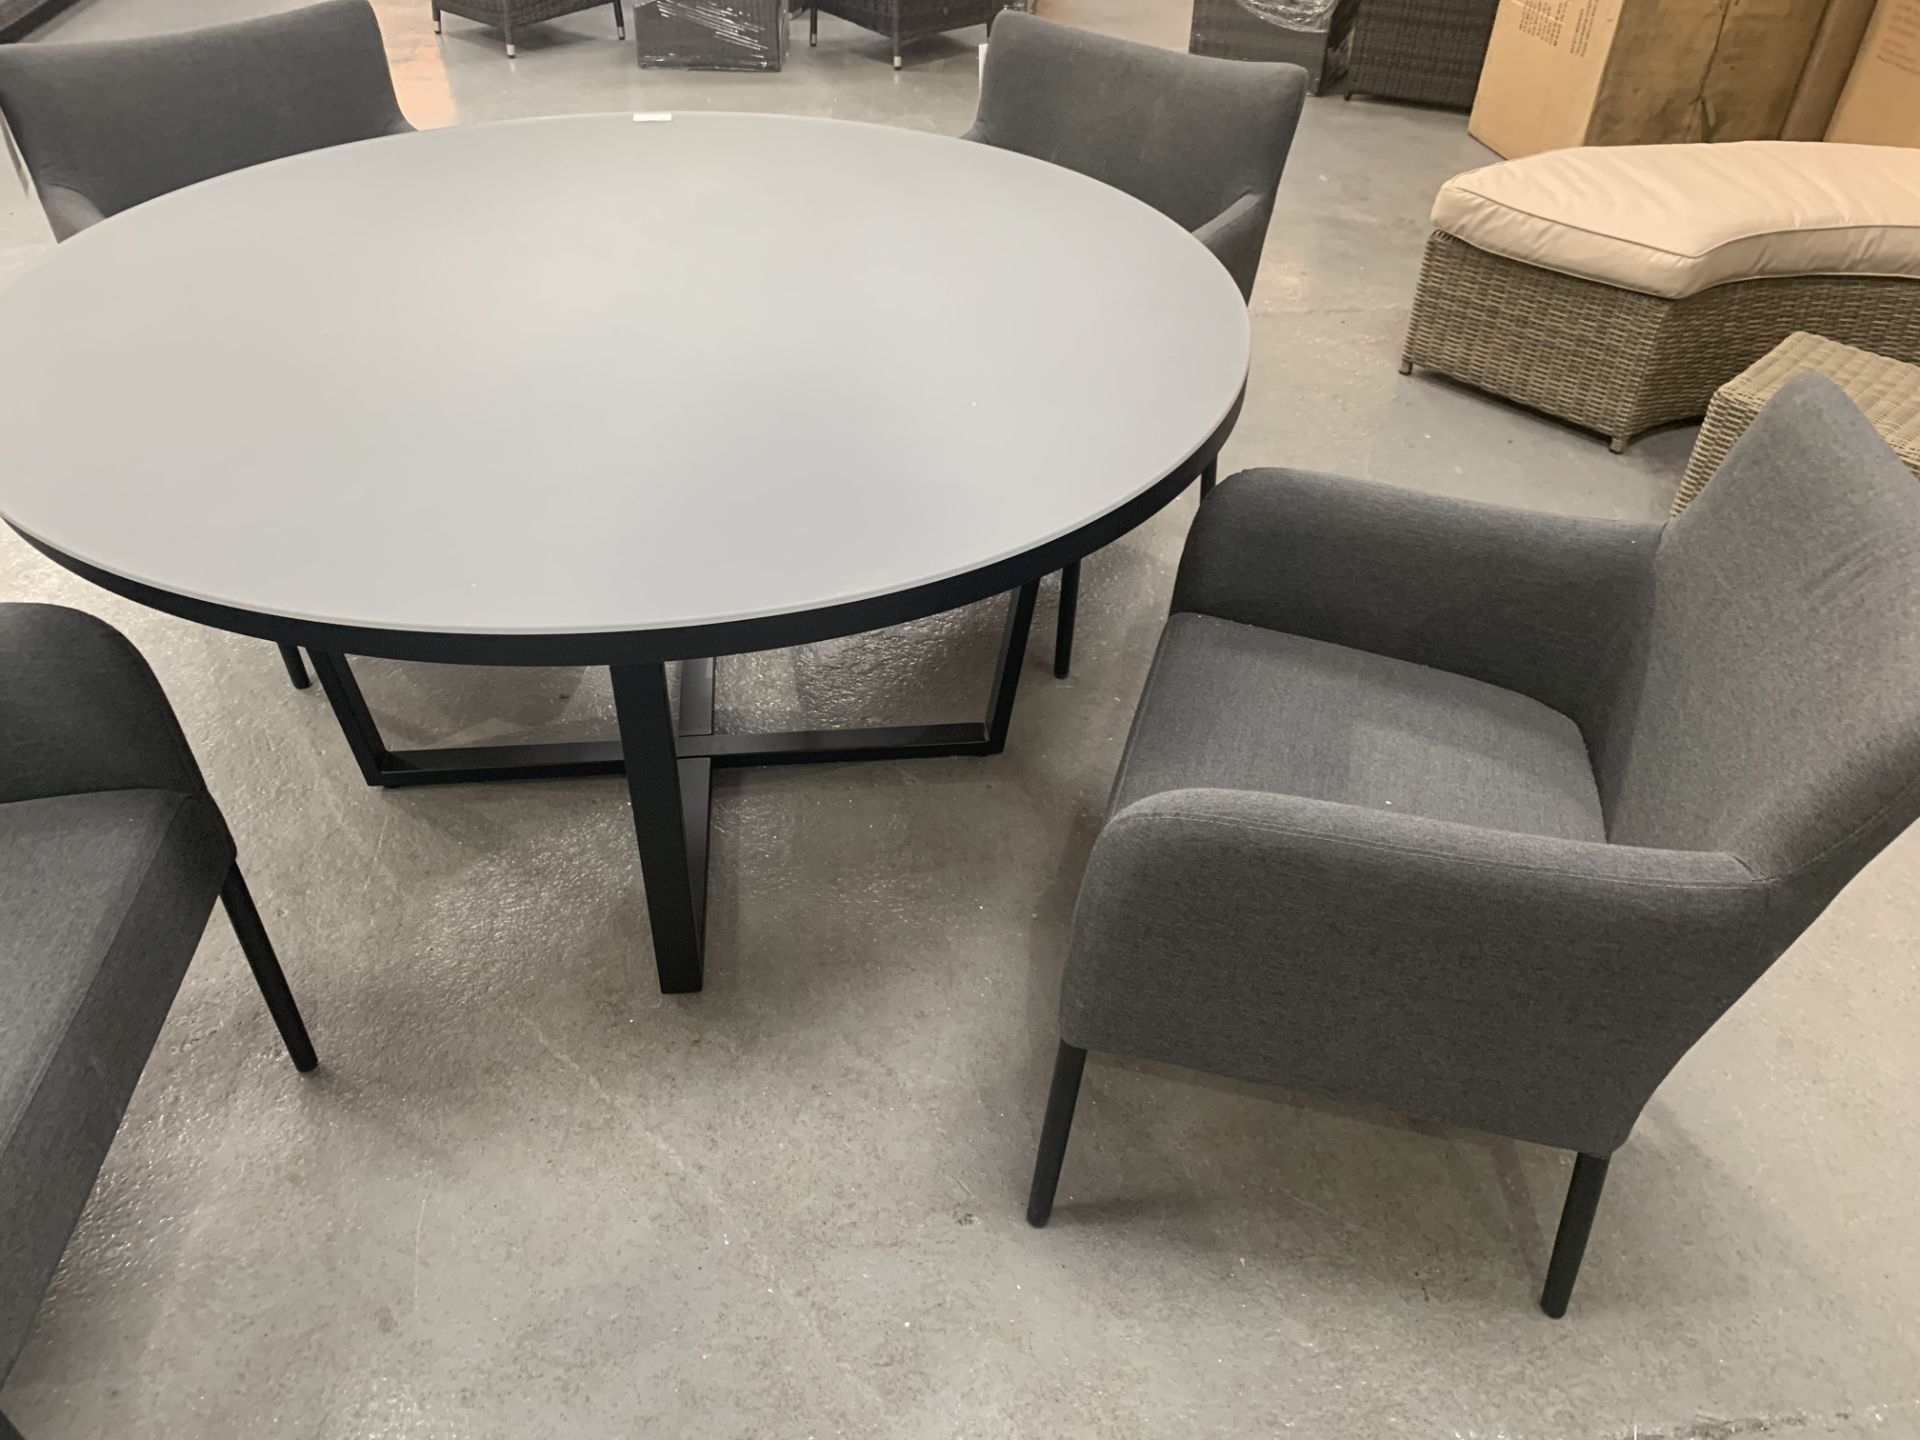 Maze Lounge Sunbrella Grey dining table with 4 matching tub chairs - Image 2 of 4